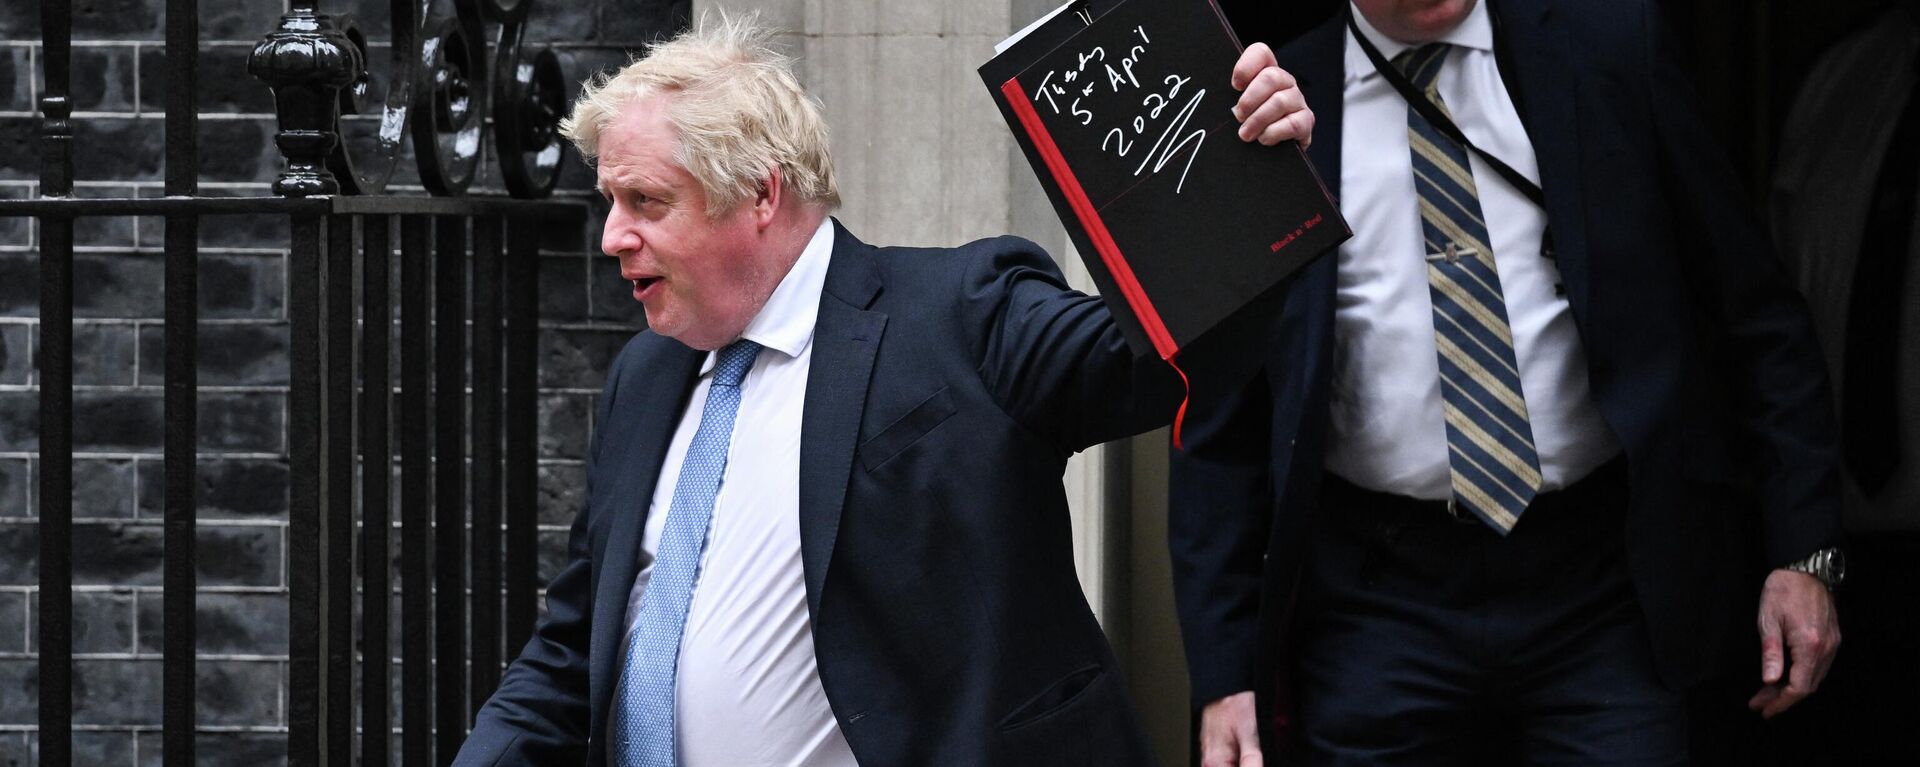 Britain's Prime Minister Boris Johnson leaves the 10 Downing Street, in London, on April 19, 2022, to give a statement at the House of Commons. - Sputnik International, 1920, 19.04.2022